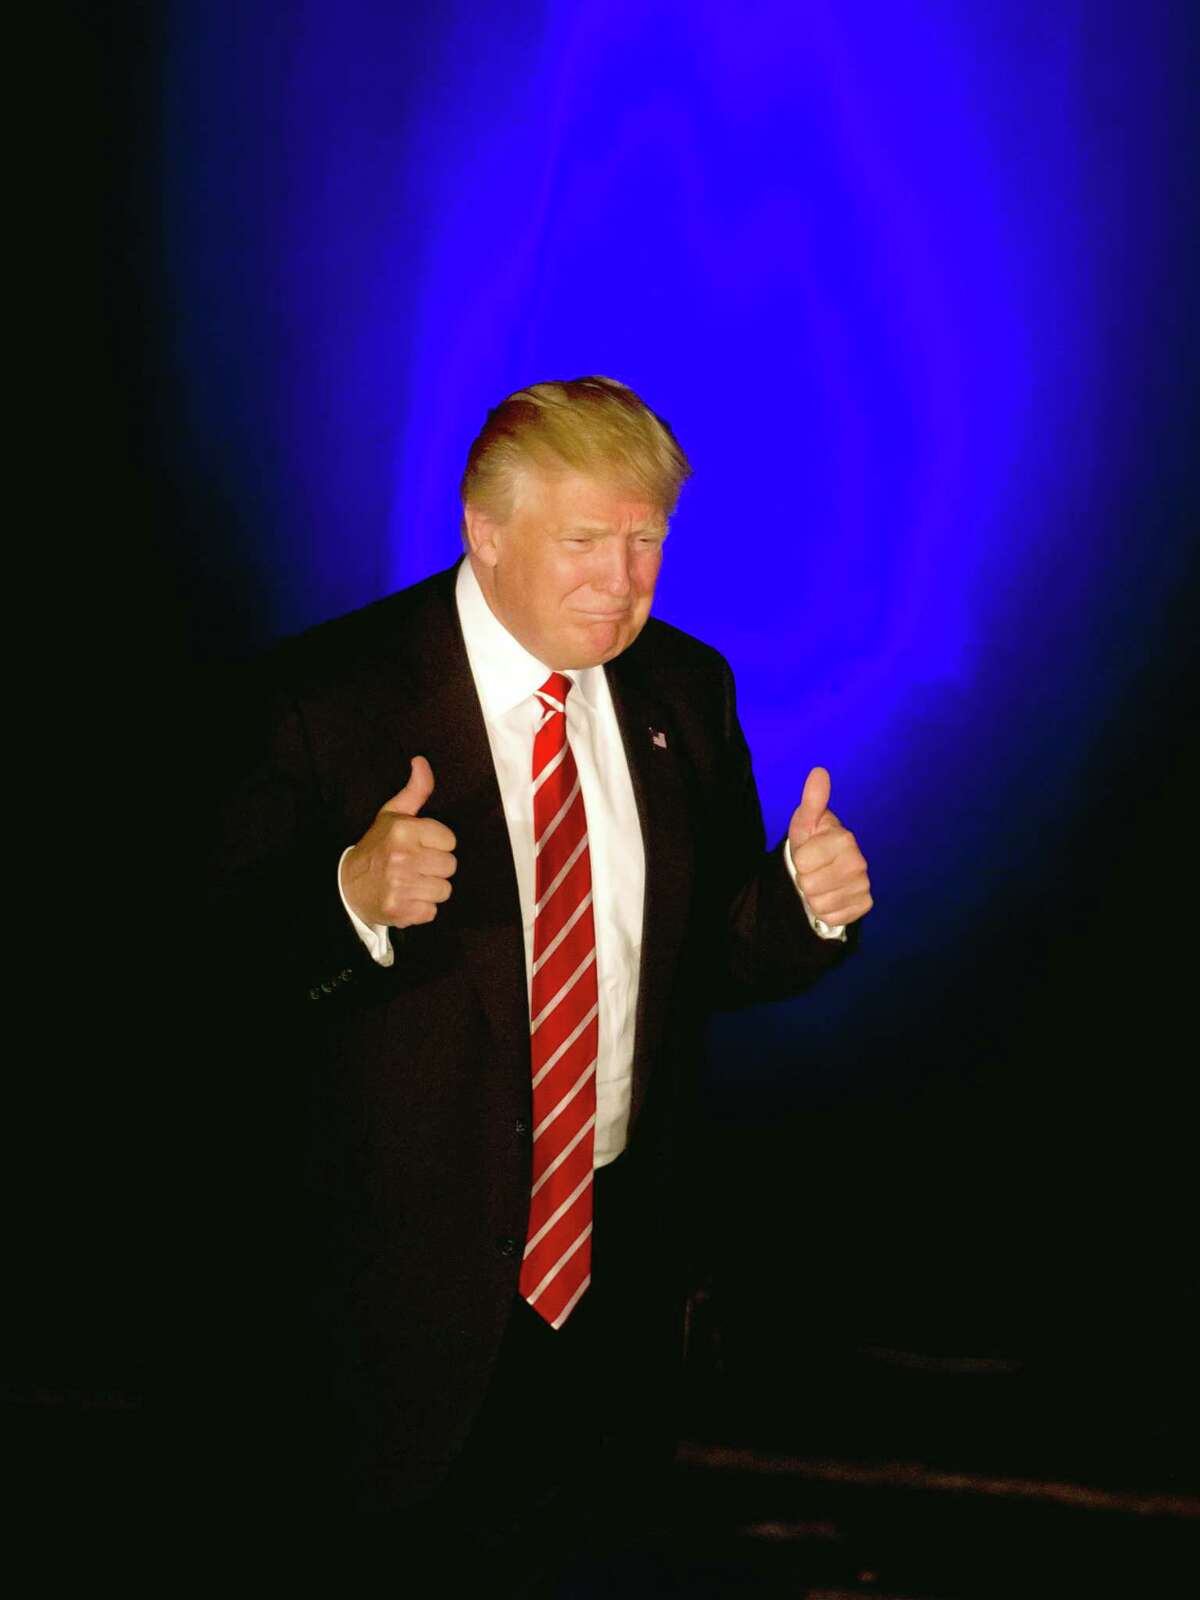 Republican presidential candidate Donald Trump gives a thumbs up as he walks on stage to speak at a rally at the Fox Theater Wednesday in Atlanta.